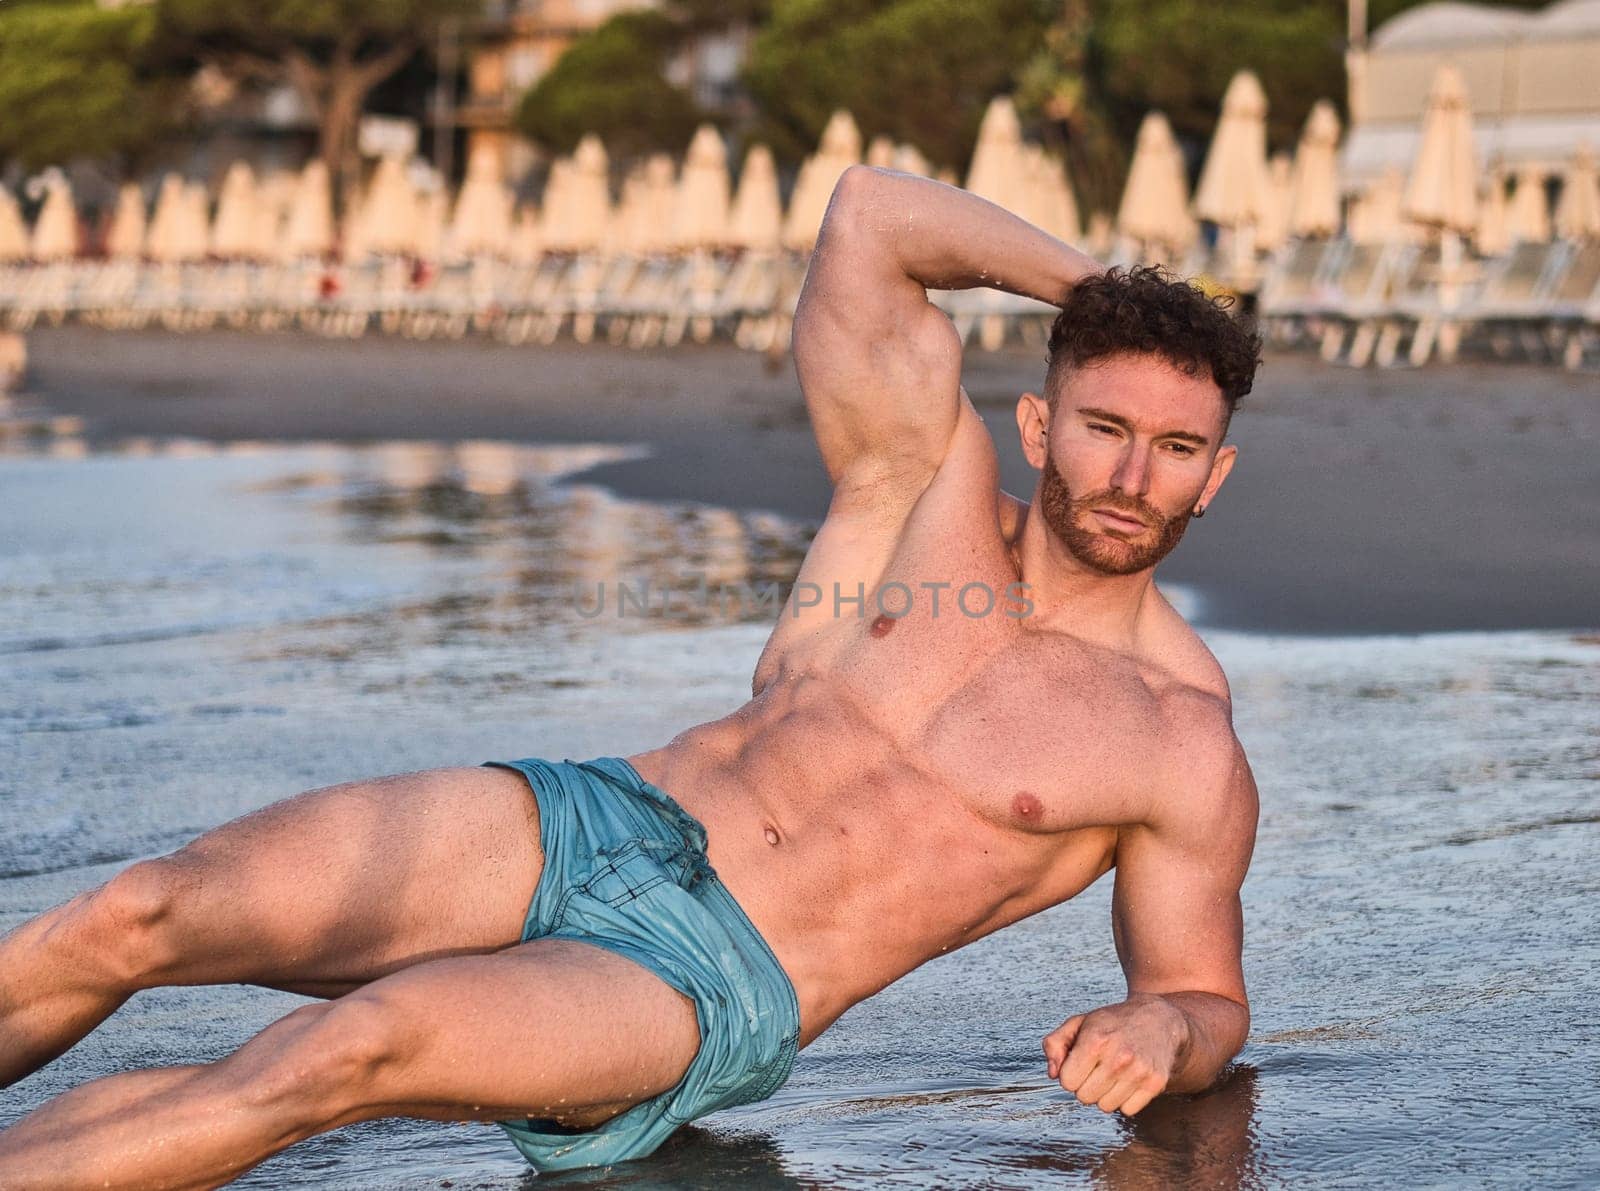 Man Relaxing on the Beach by artofphoto